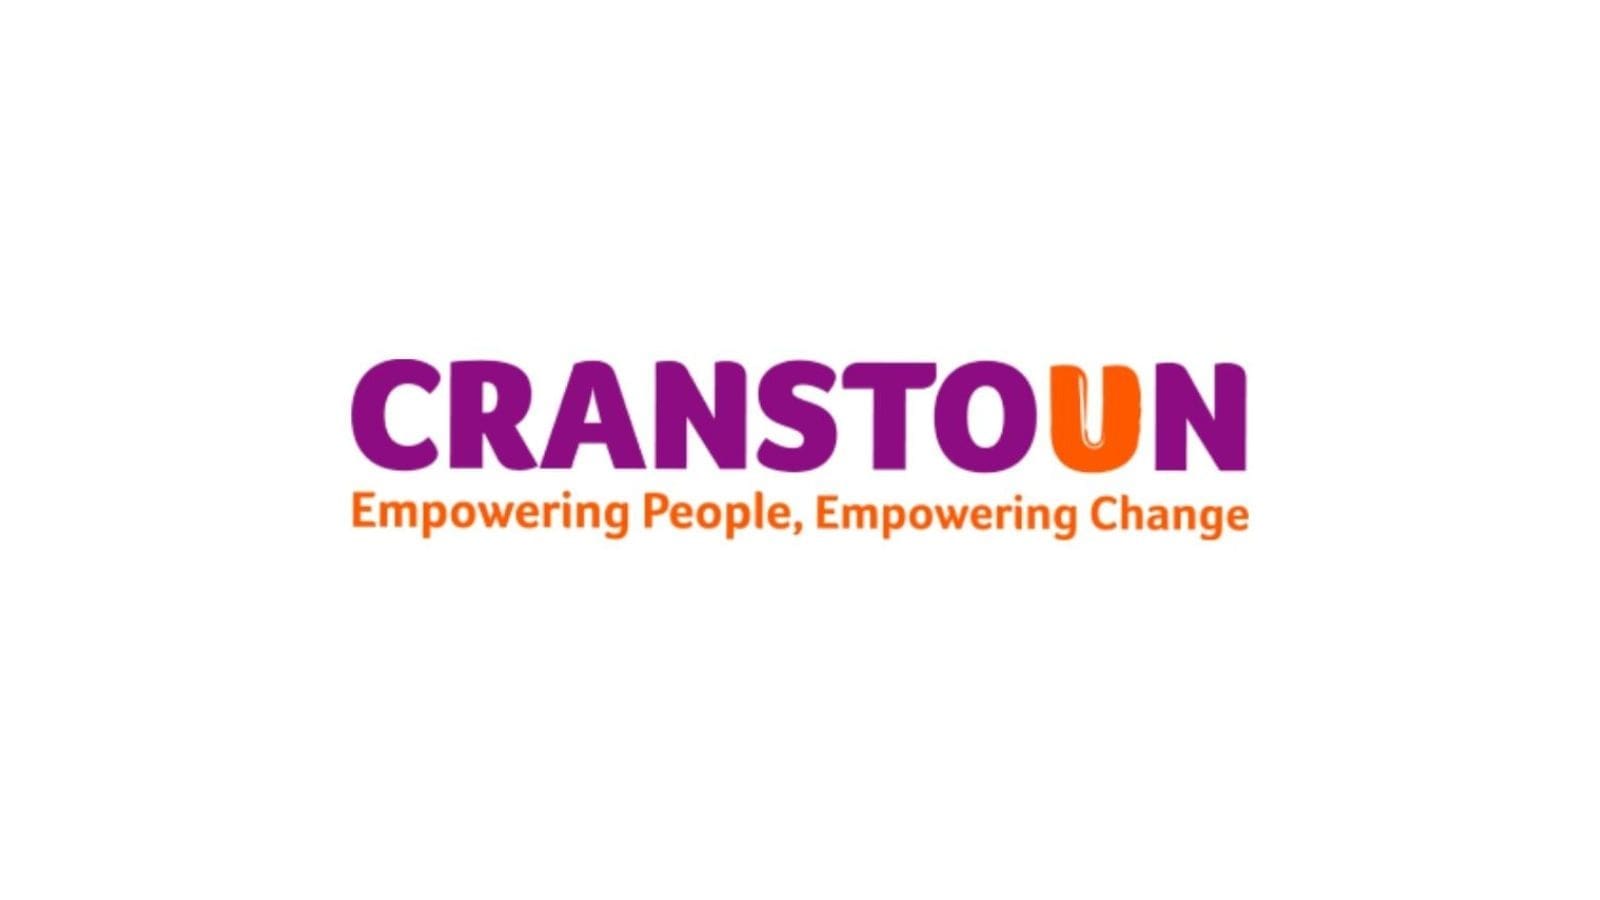 The word "Cranstoun" in purple and the "U" is in orange. Below this is the words "Empowering People, Empowering Change" in orange.